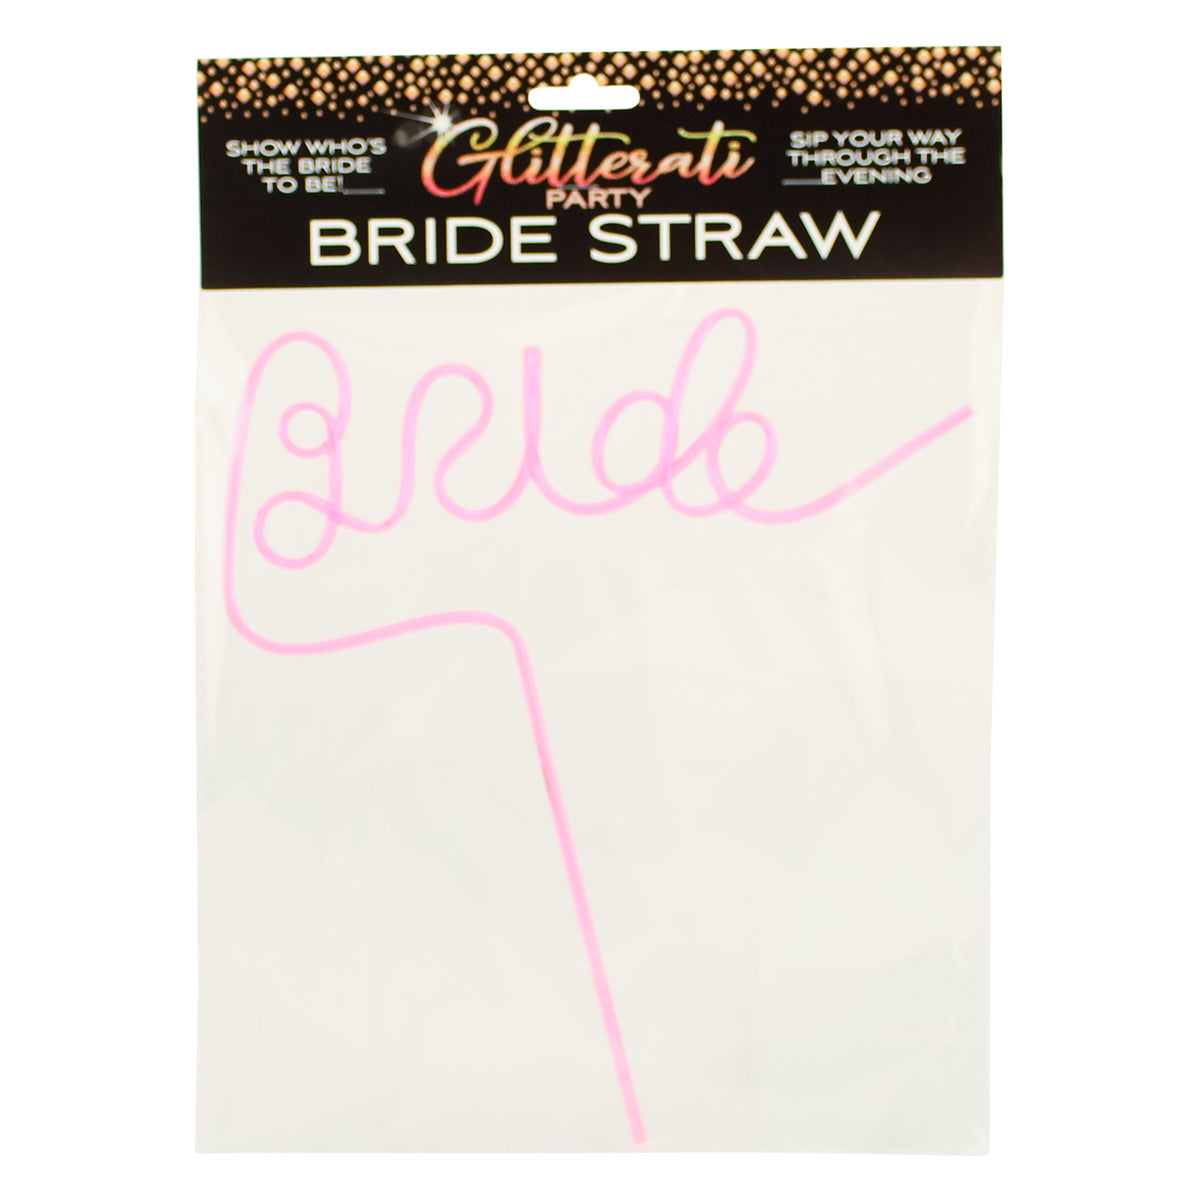 The Bride Silly Straw